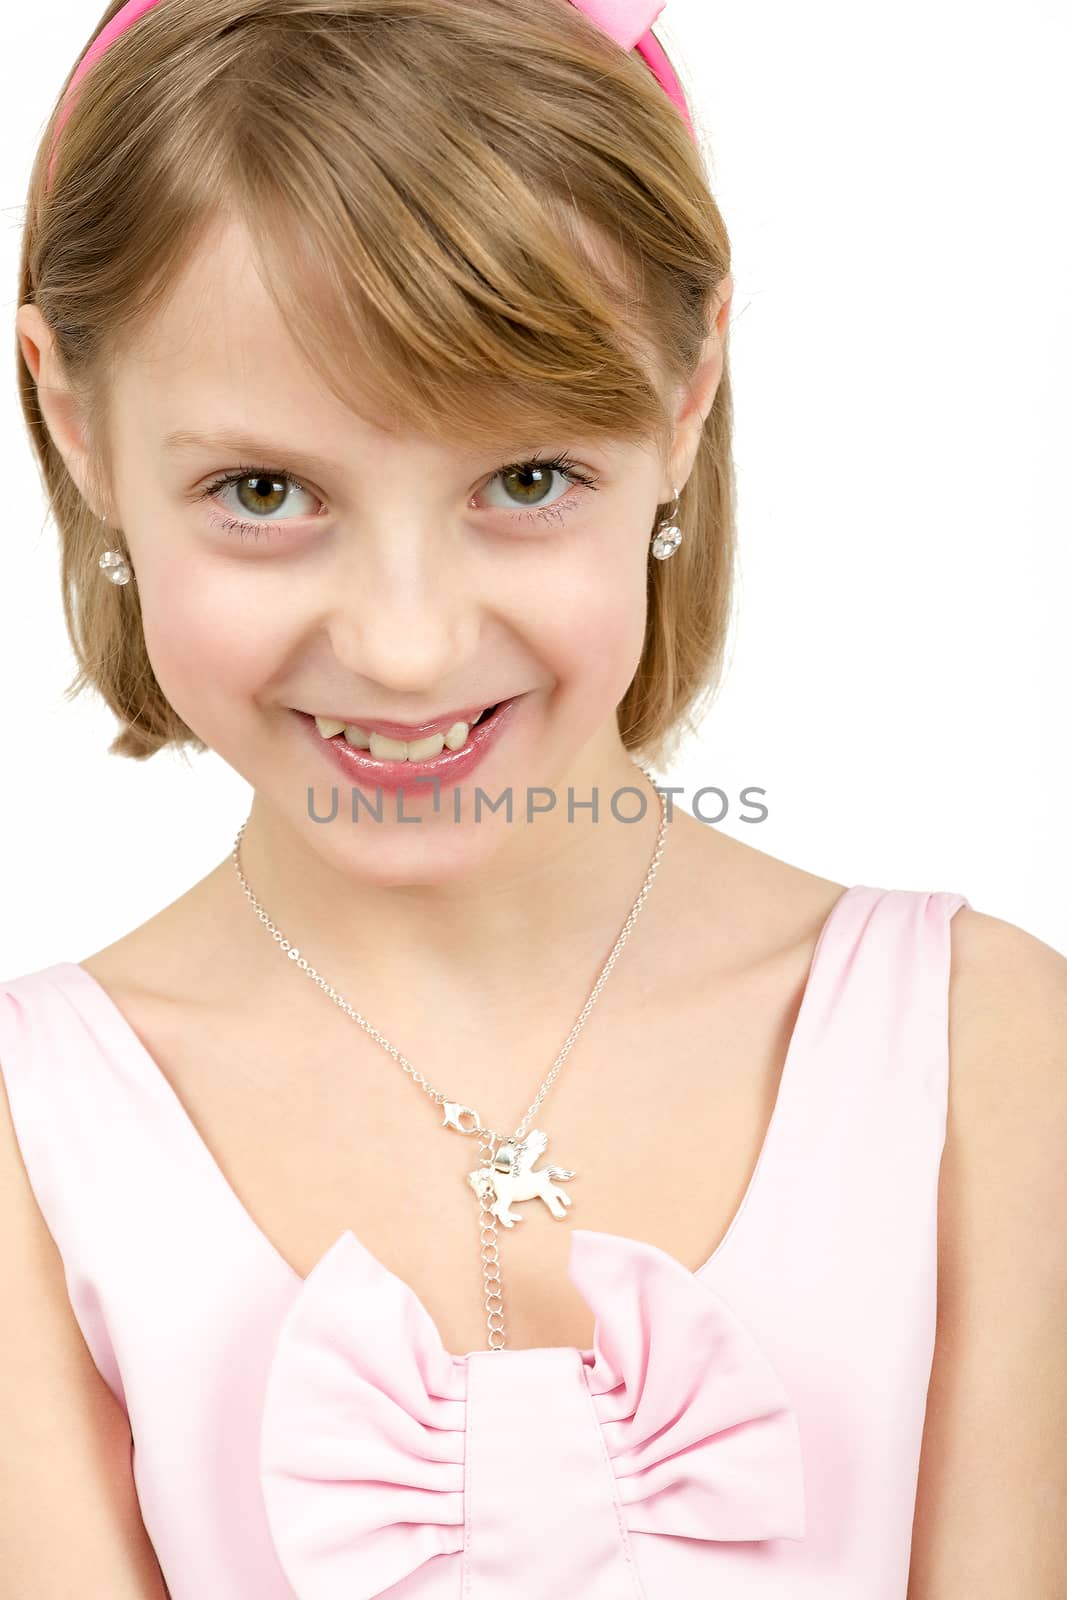 Studio portrait of young smiling beautiful girl with nice eyes on white background